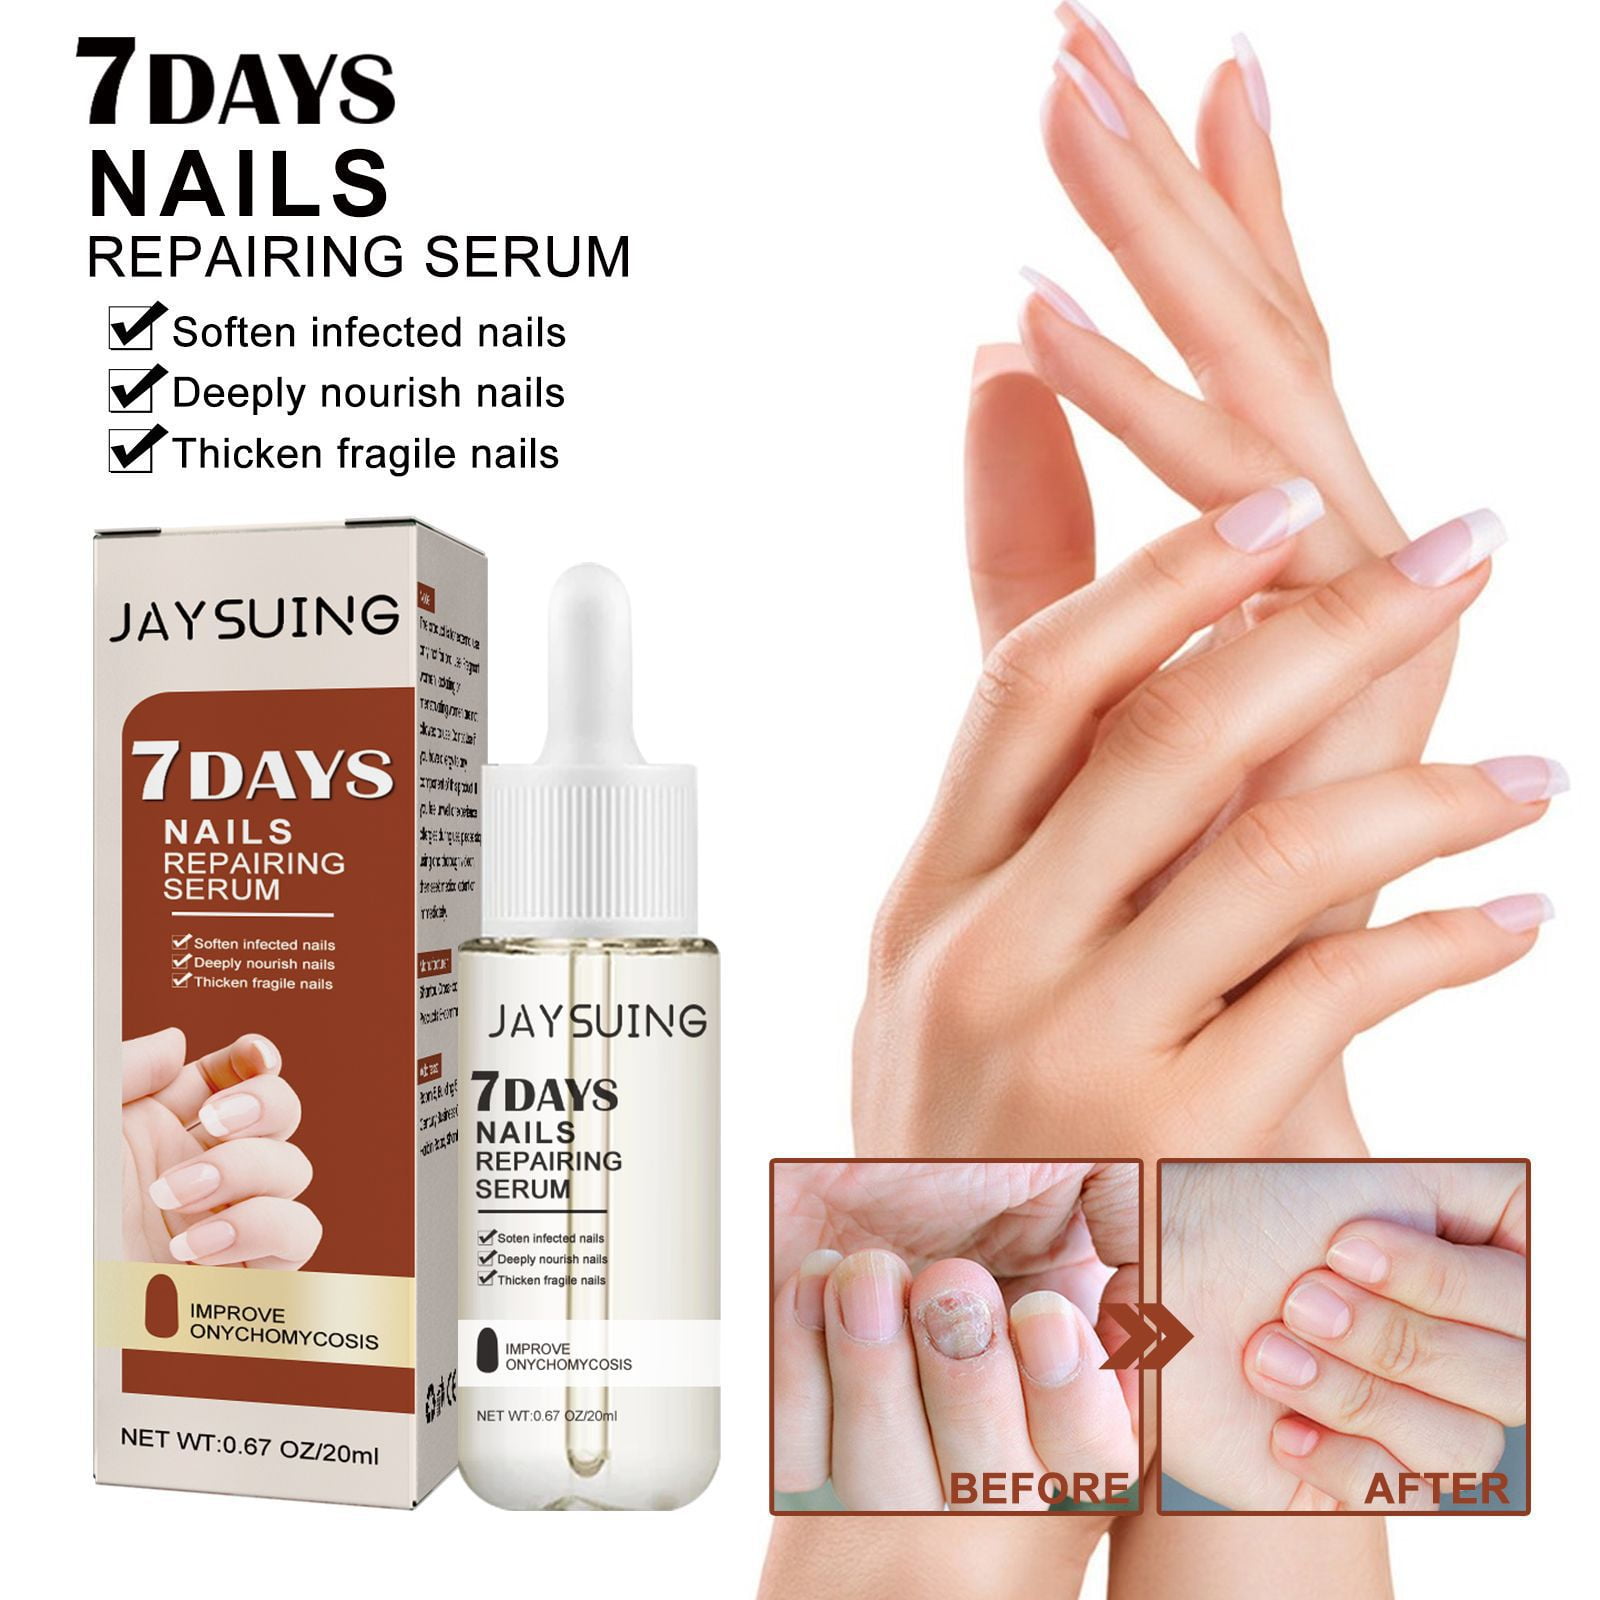 DIY Nail Growth Serum for Stronger Nails - Homemade Chemical-Free